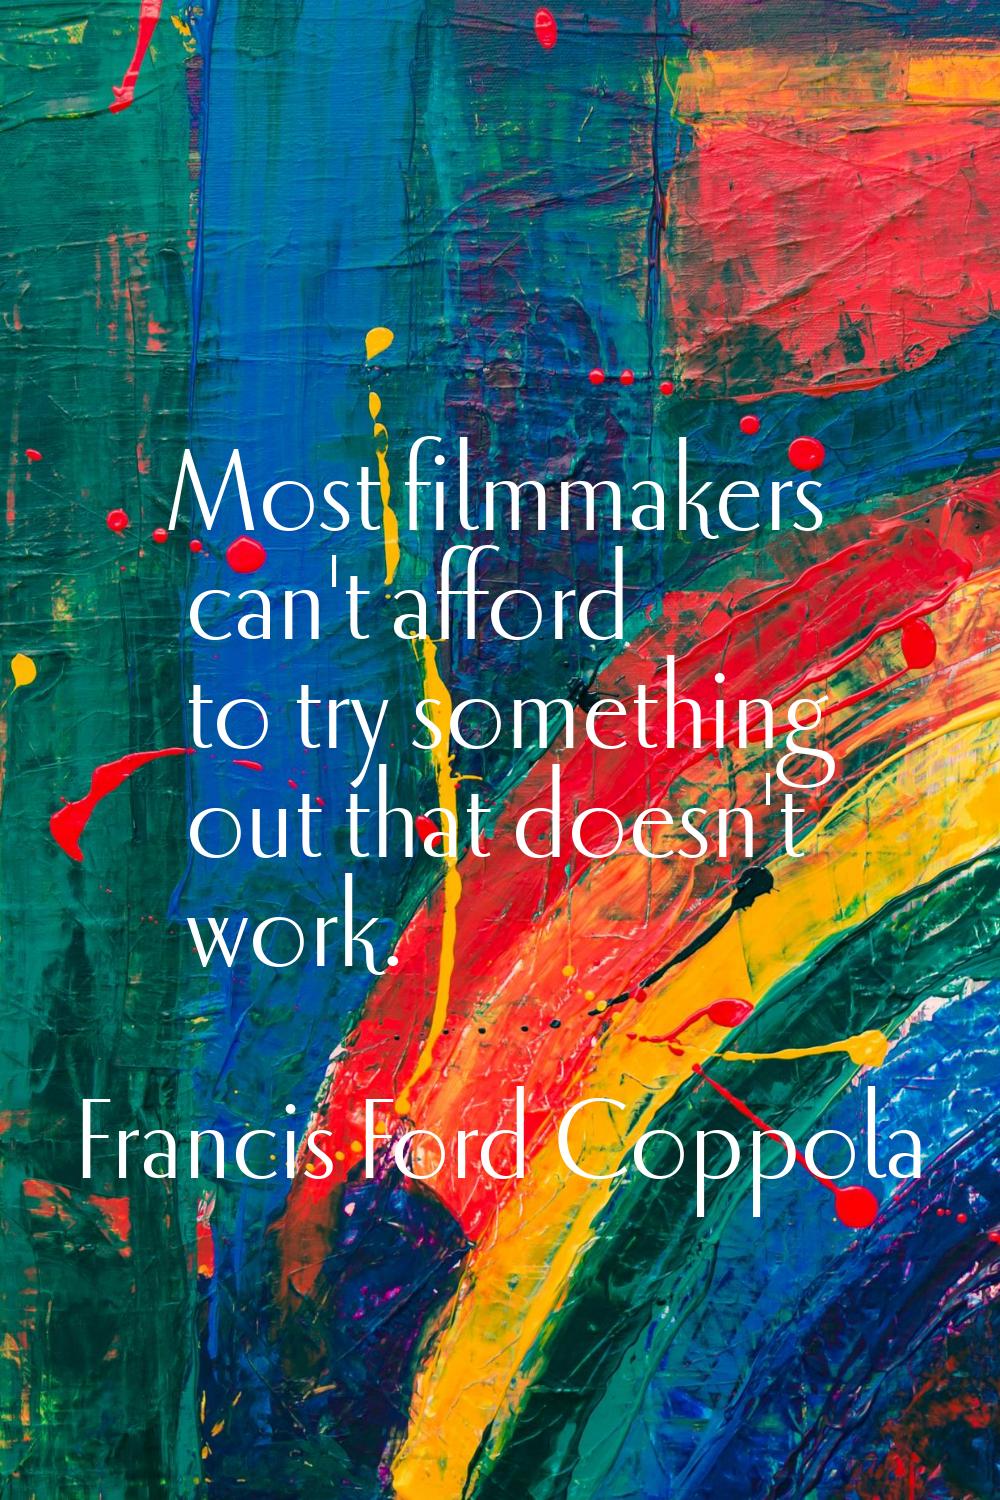 Most filmmakers can't afford to try something out that doesn't work.